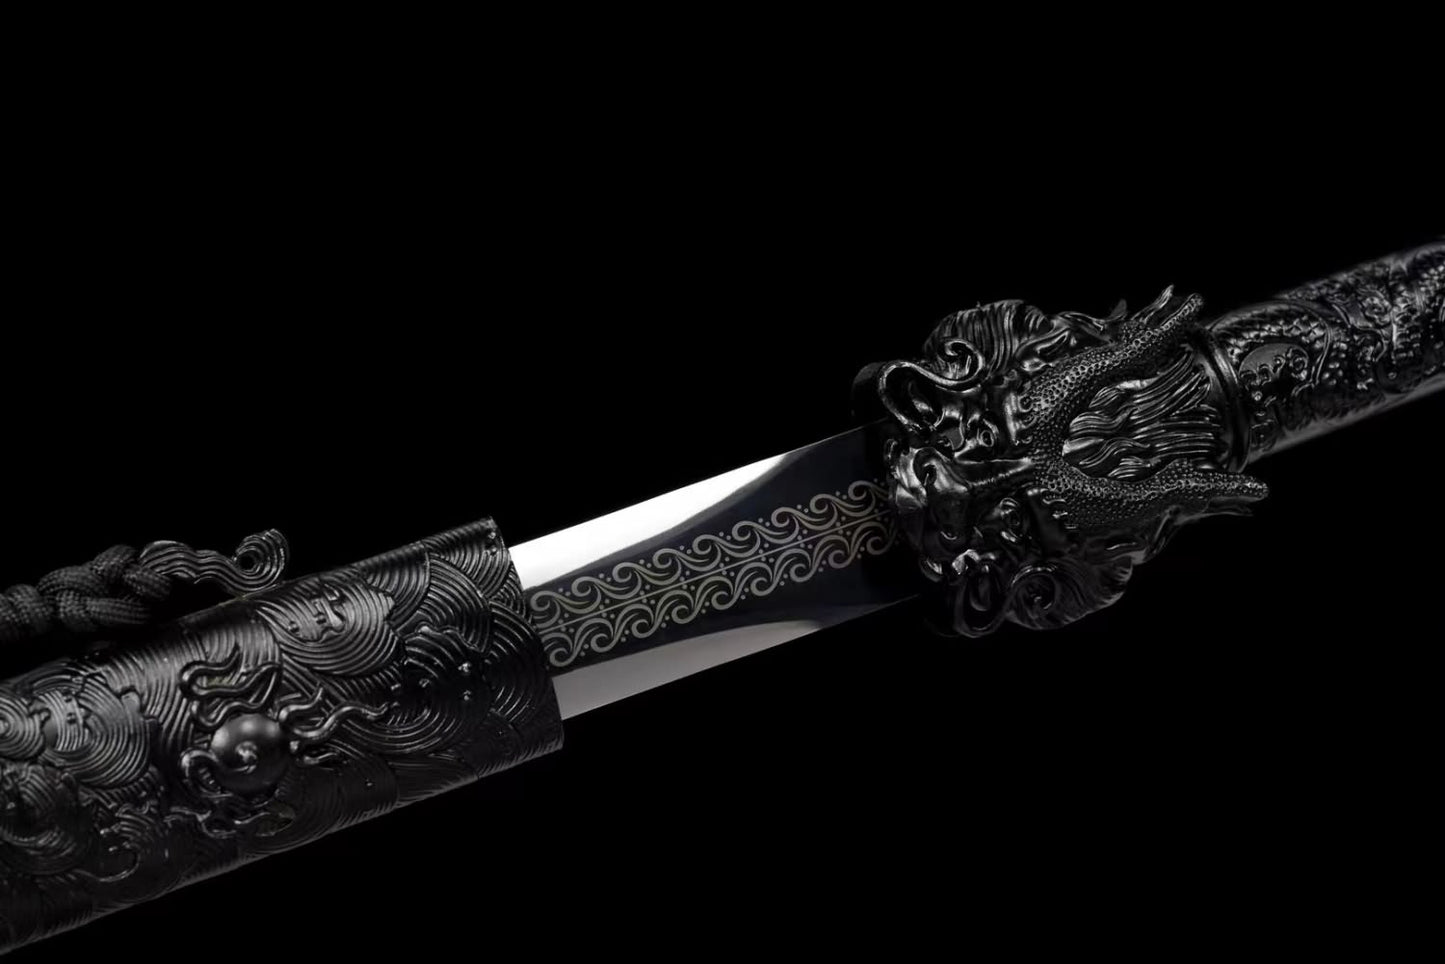 Dragon King Swords Real High Carbon Steel Blades,Alloy Fittings,PU Scabbard